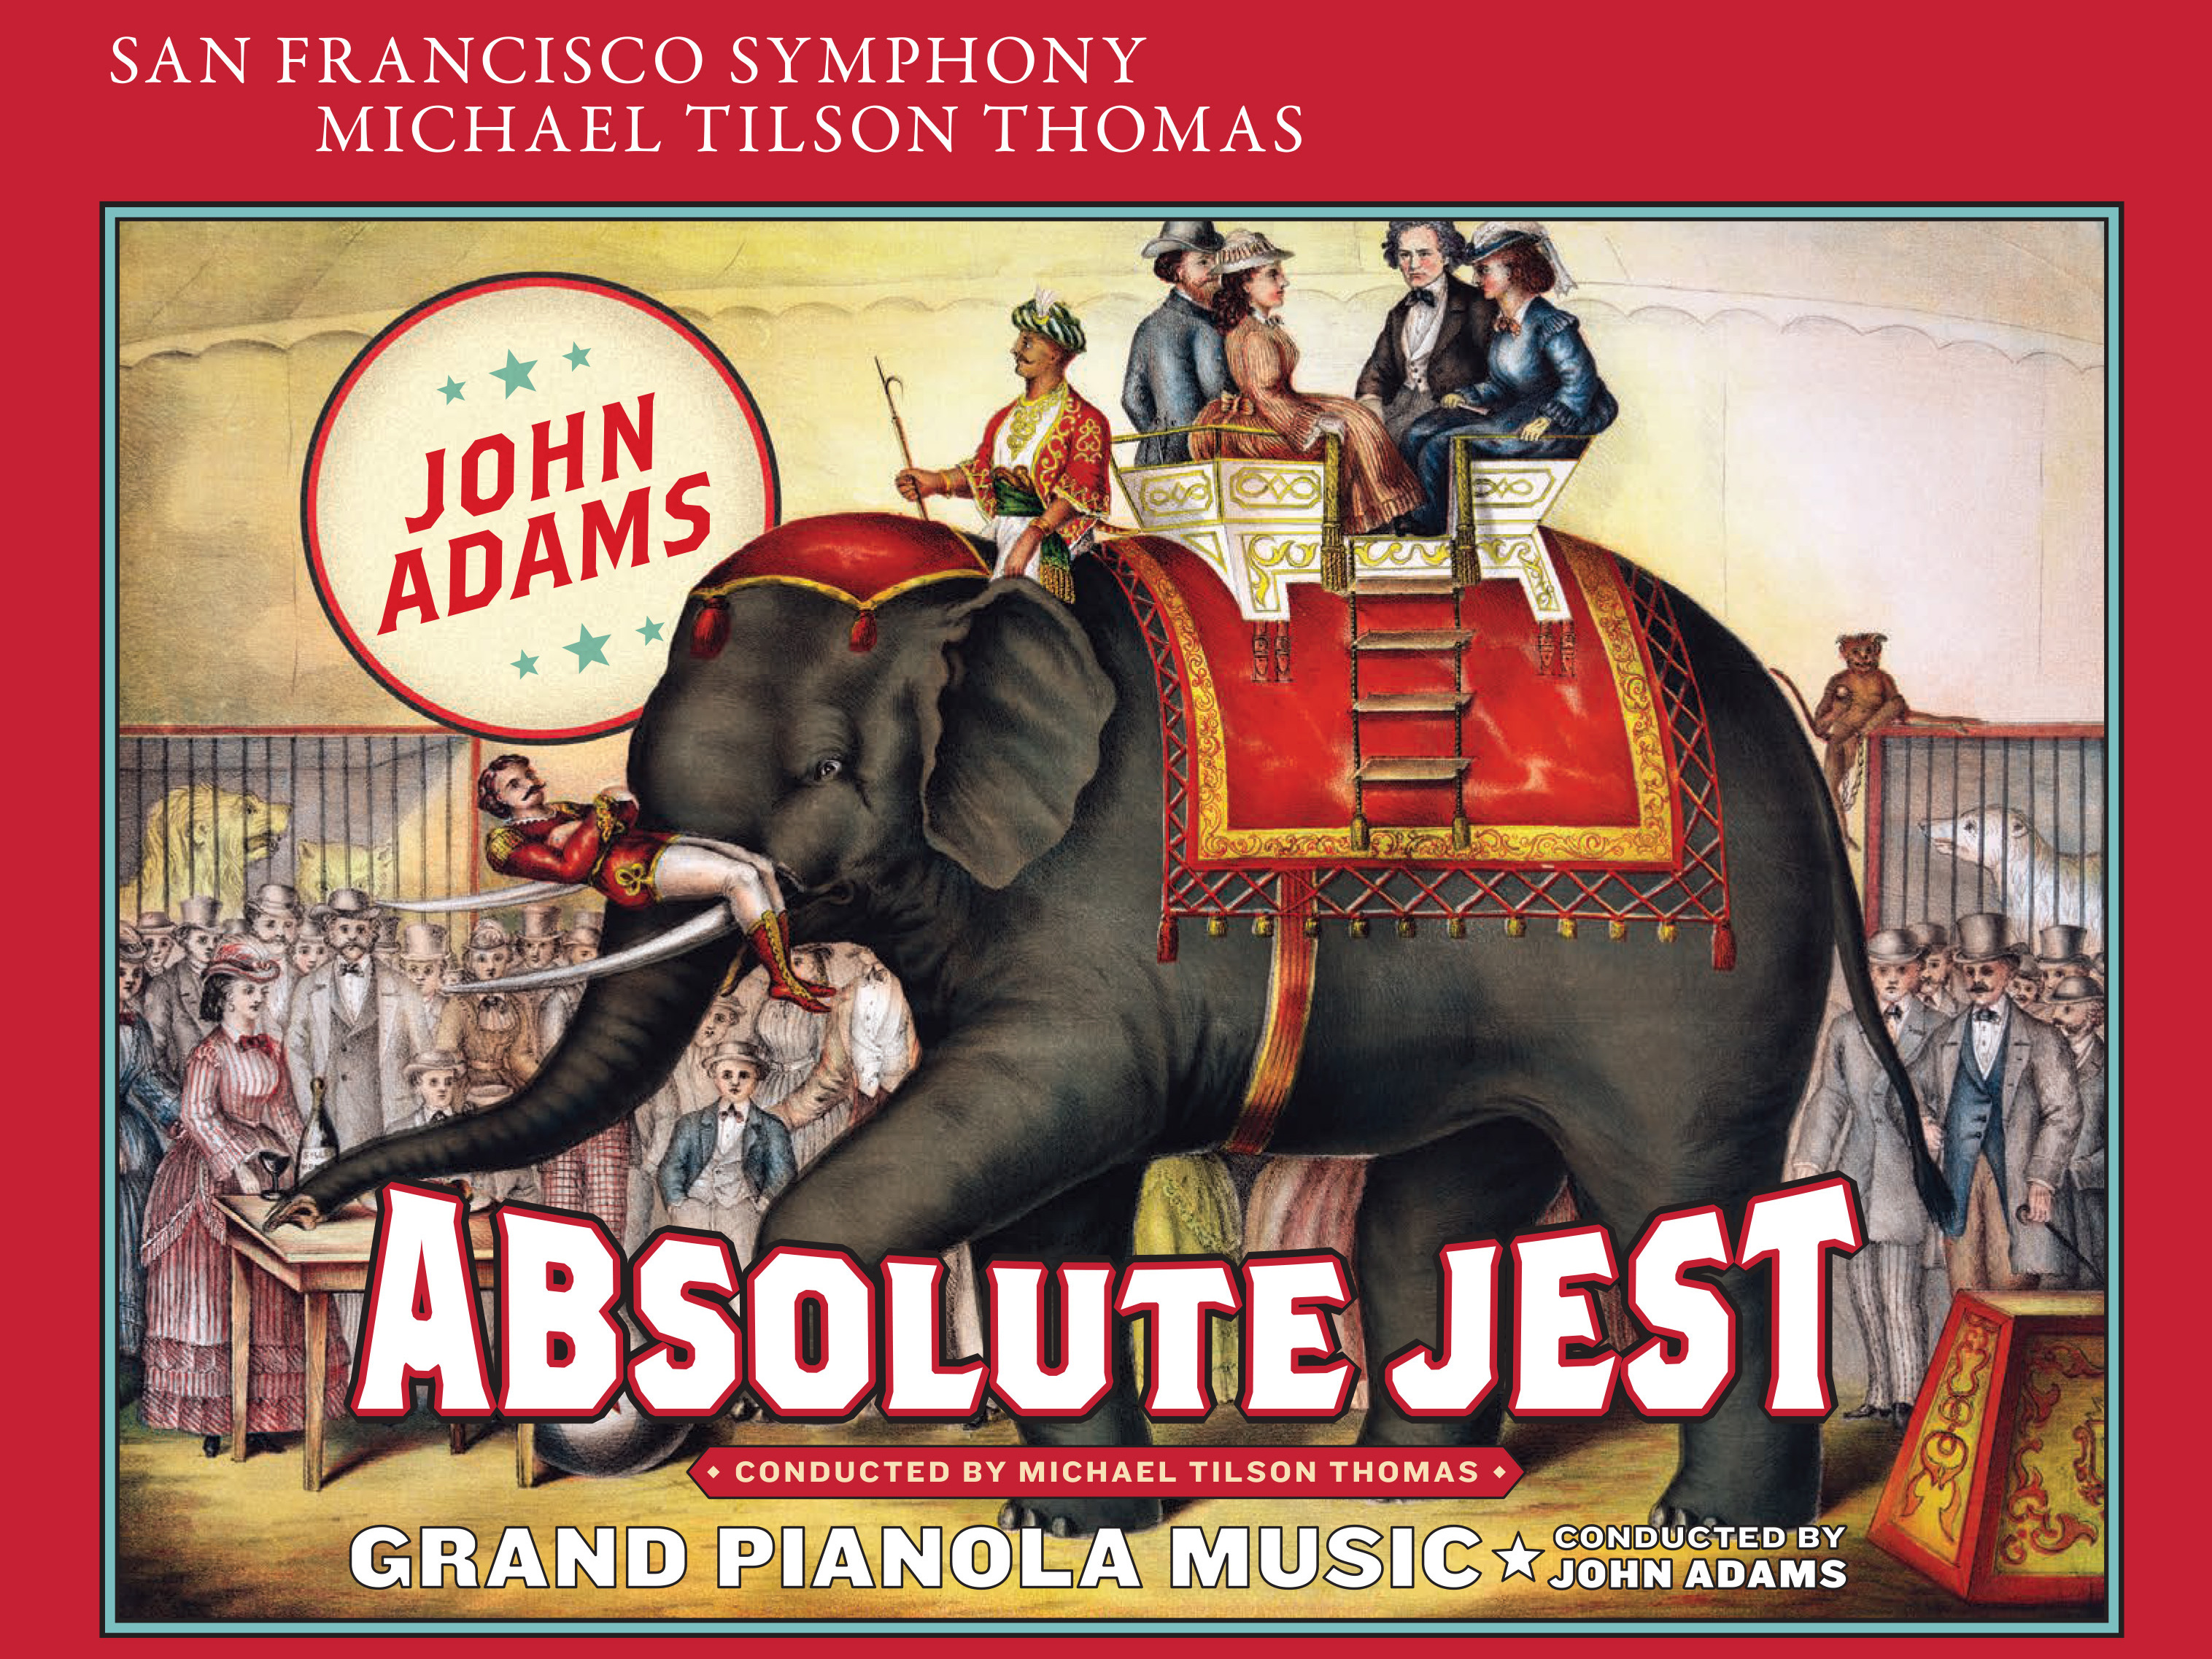 The San Francisco Symphony's recording of two Beethovenian works by John Adams is one of our picks for 2015.